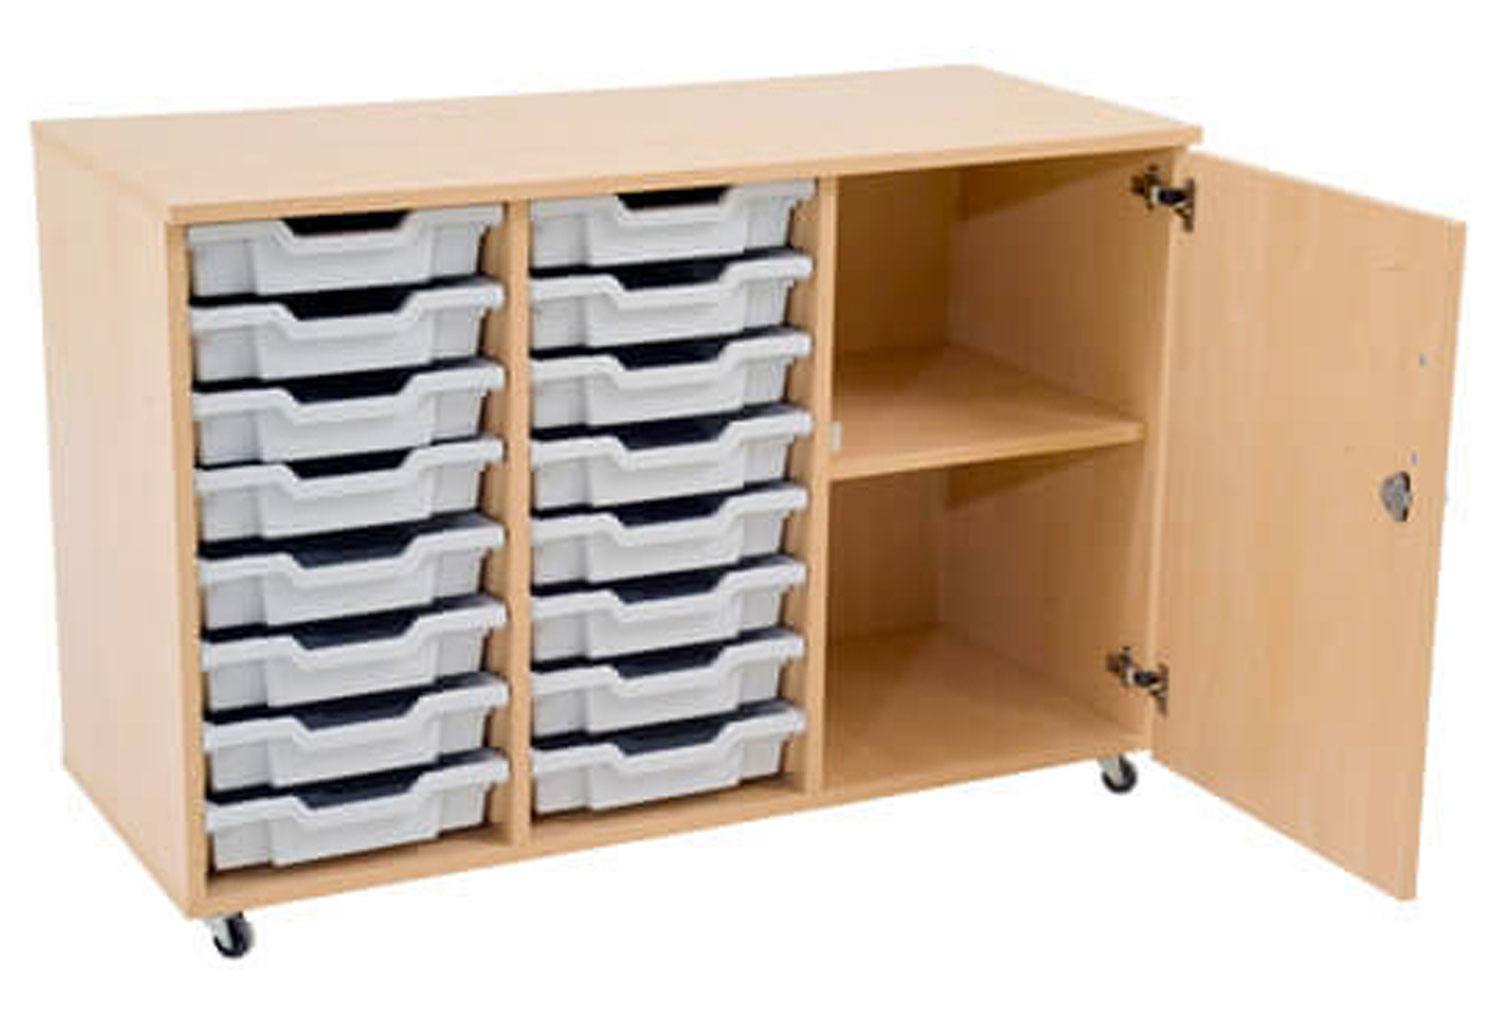 Mobile Storage Unit With 1 Shelf And 16 Shallow Gratnells Trays